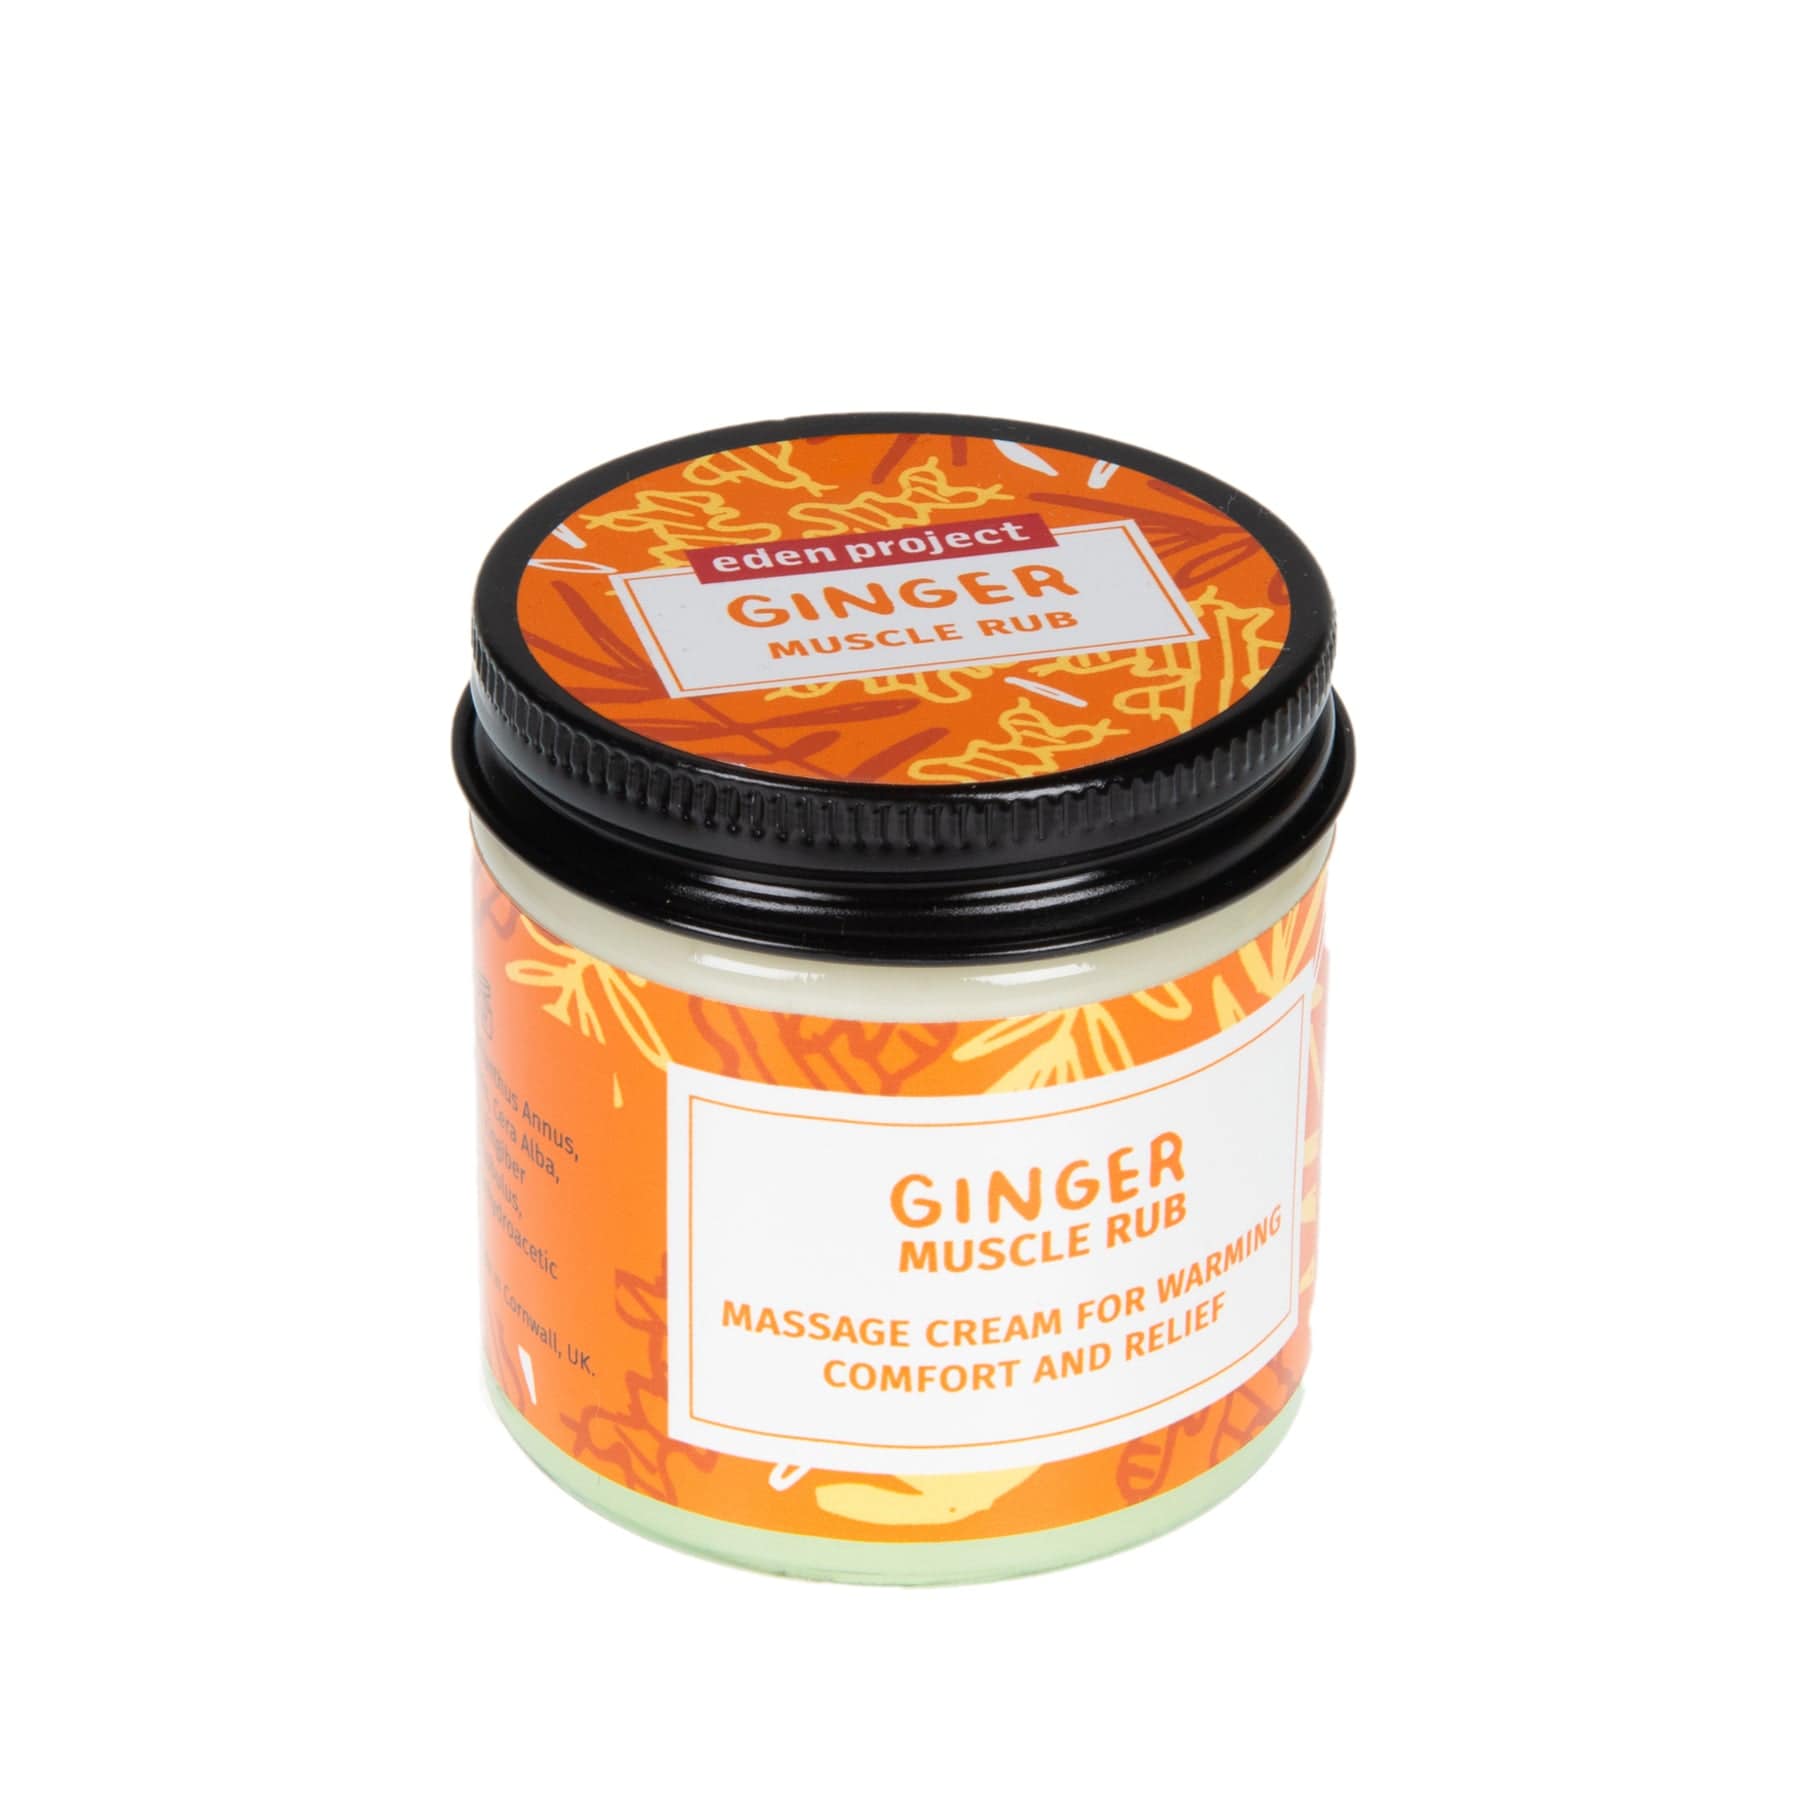 Eden Project ginger muscle rub cream in jar, orange label, massage cream for warming comfort and relief, isolated on white background